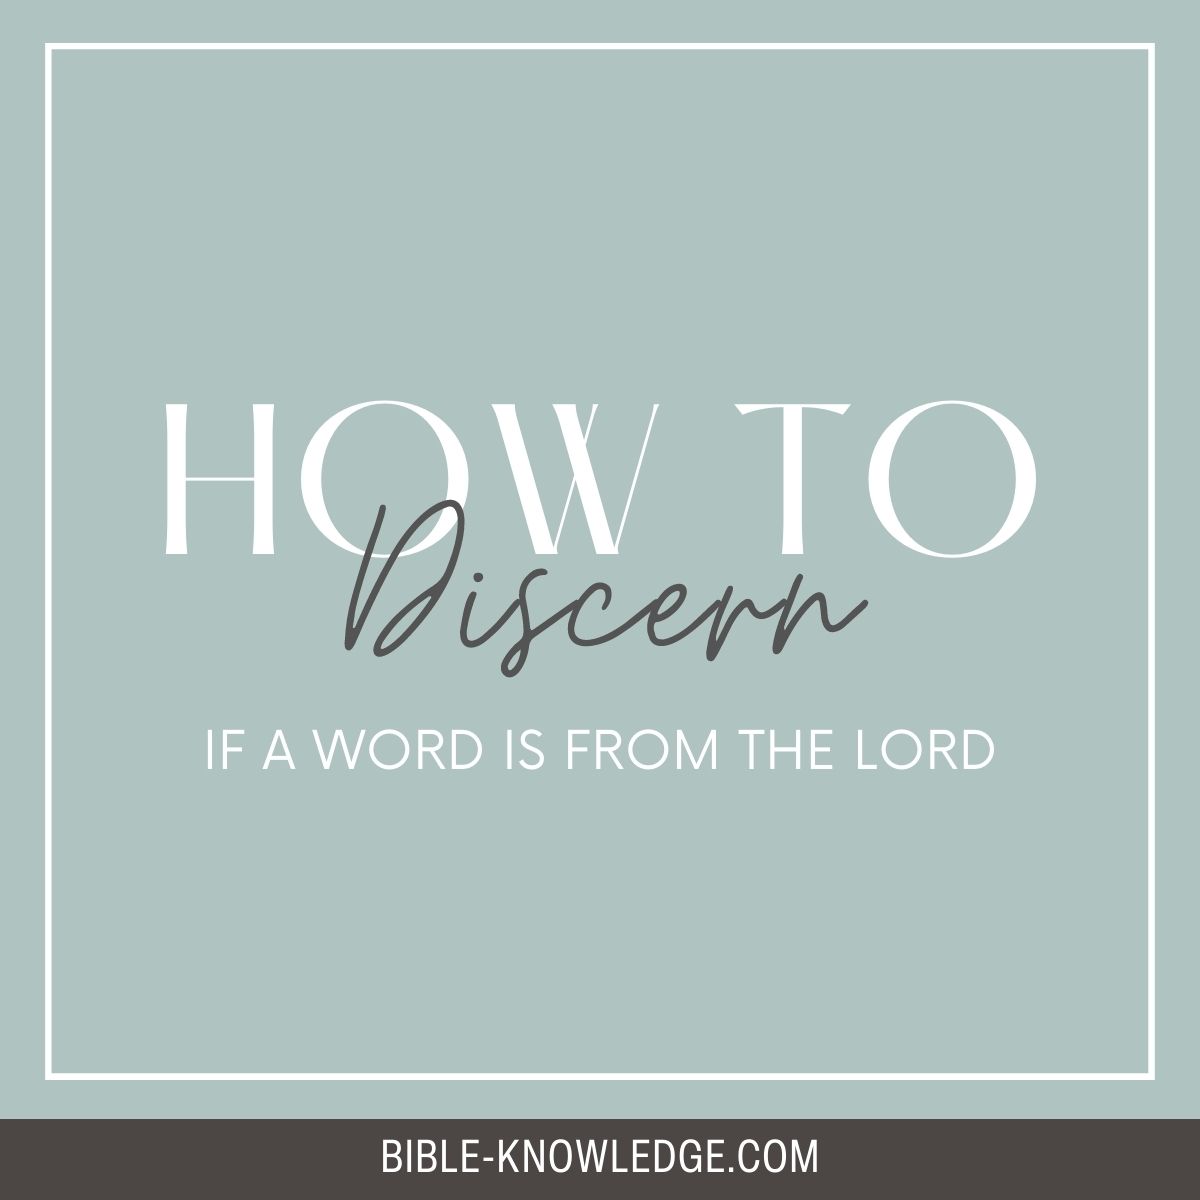 How to Discern if a Word is From the Lord